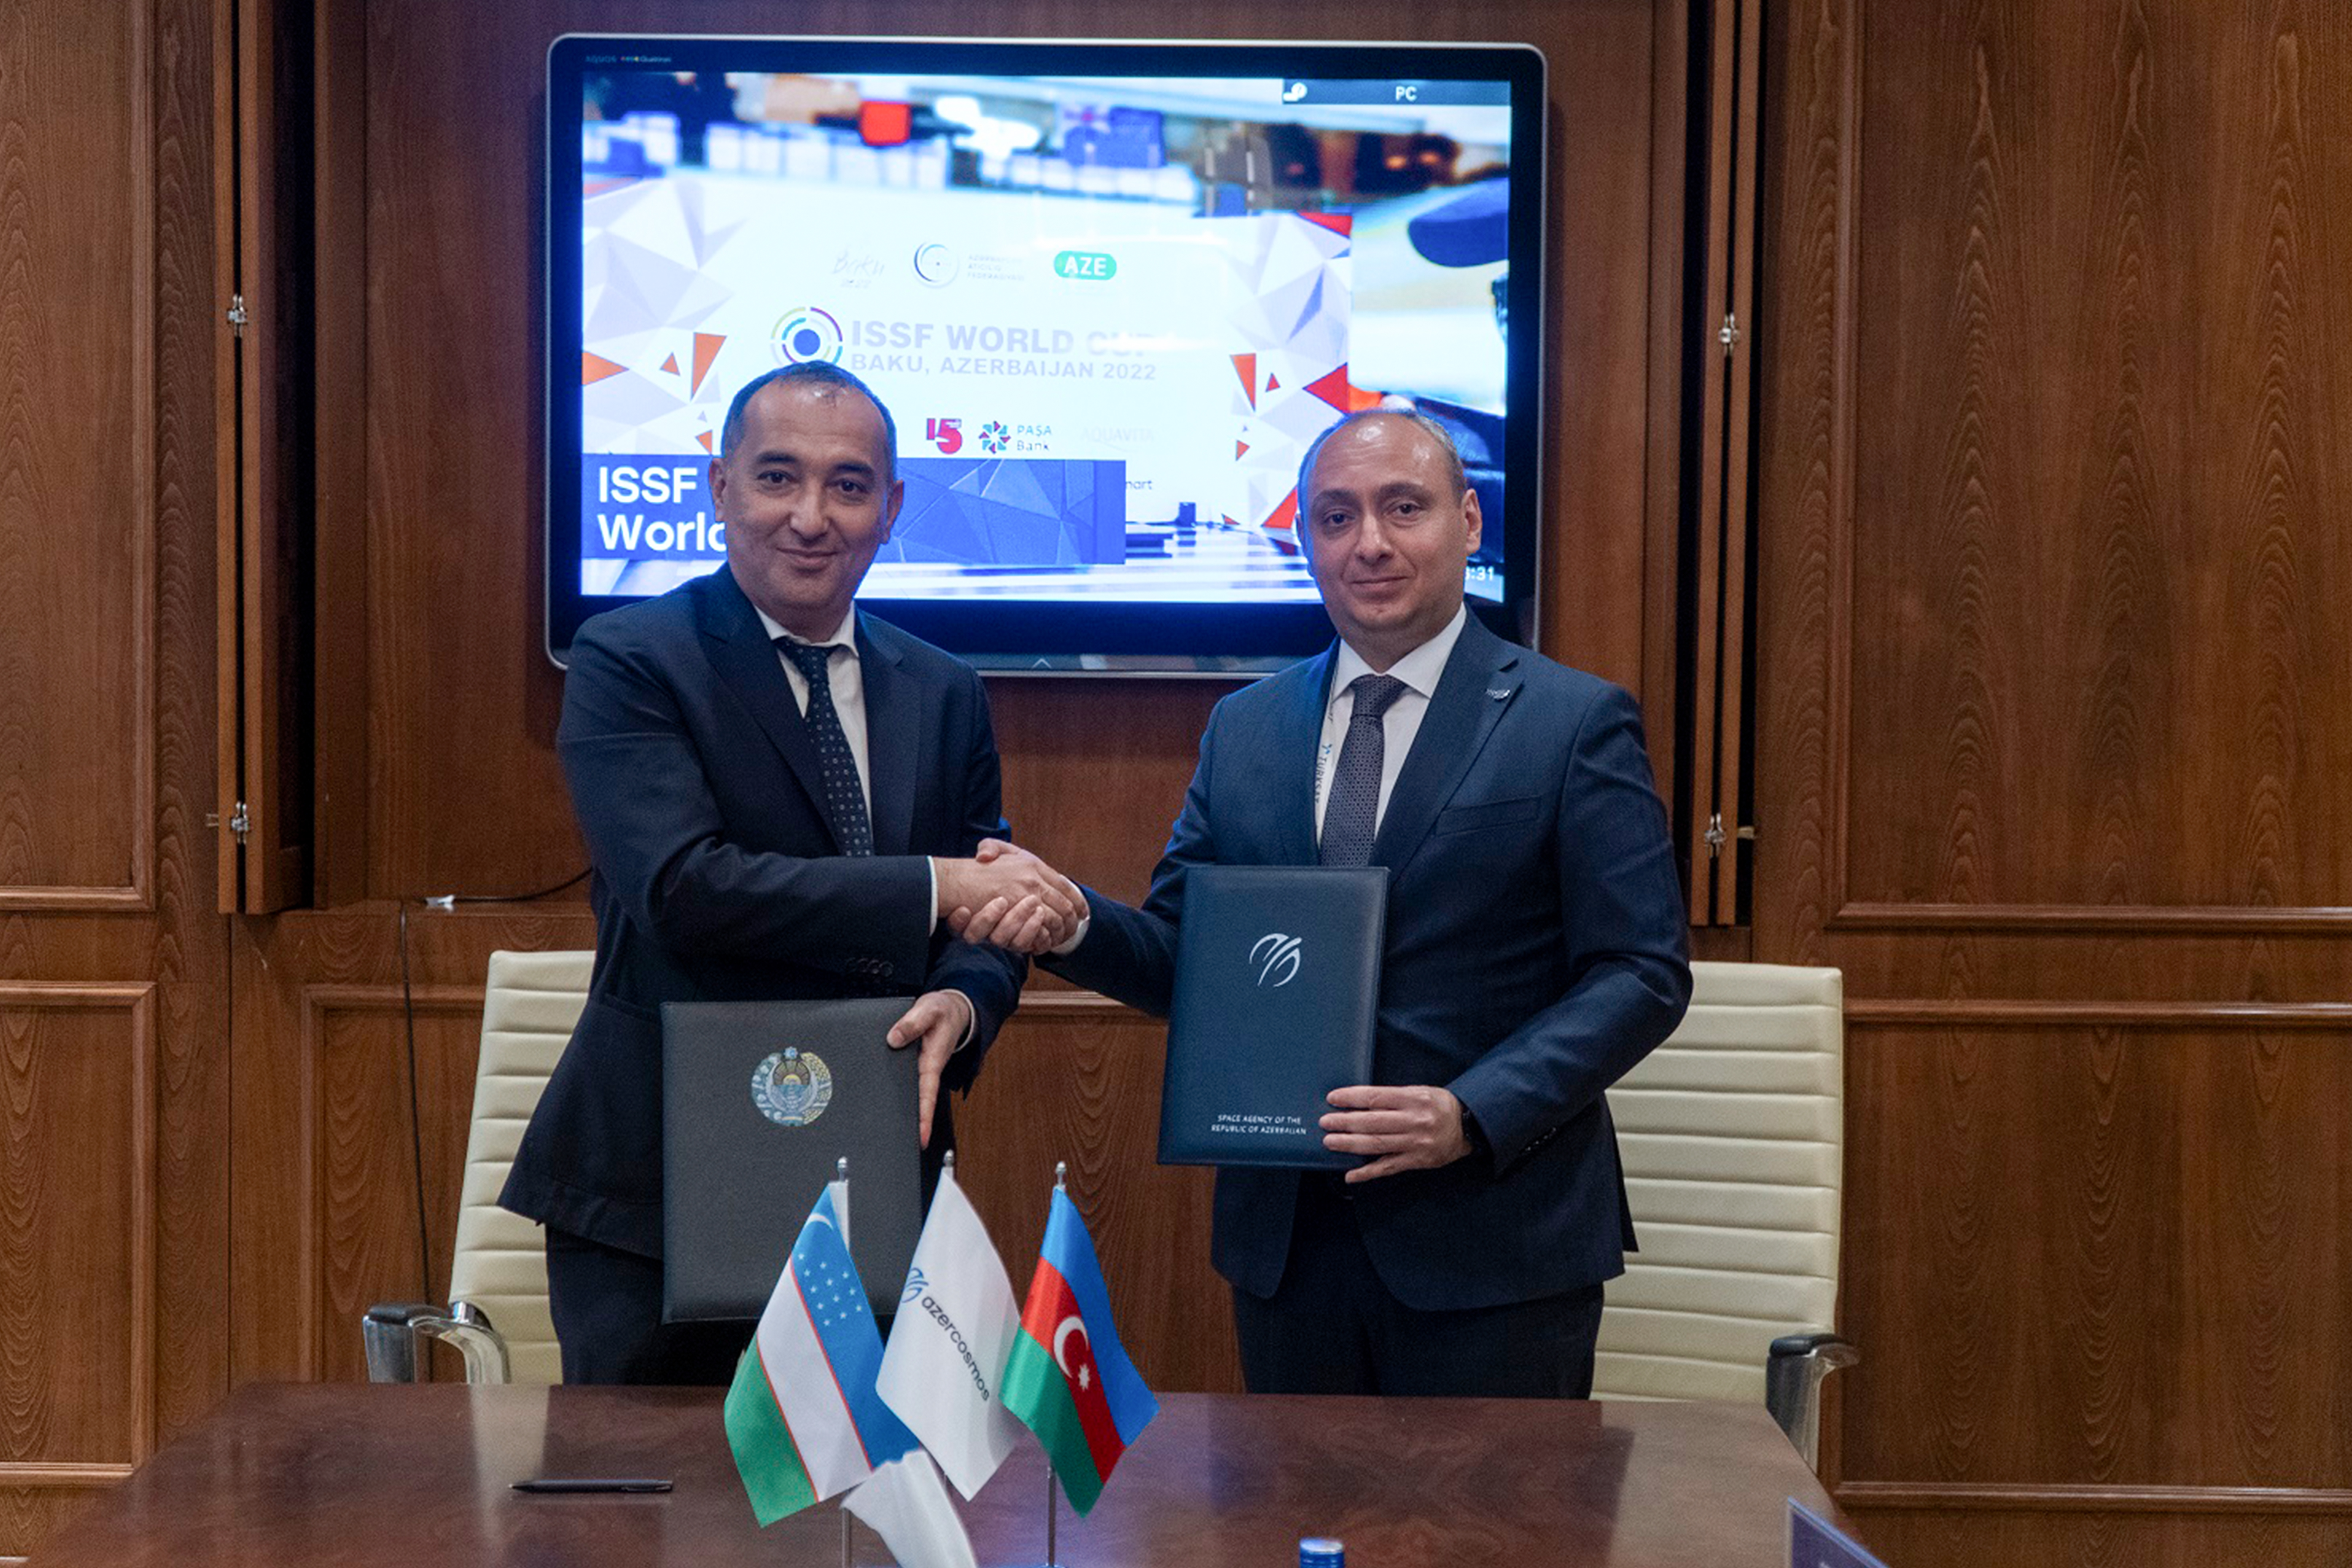 Azercosmos is expanding its cooperation with Uzbekistan